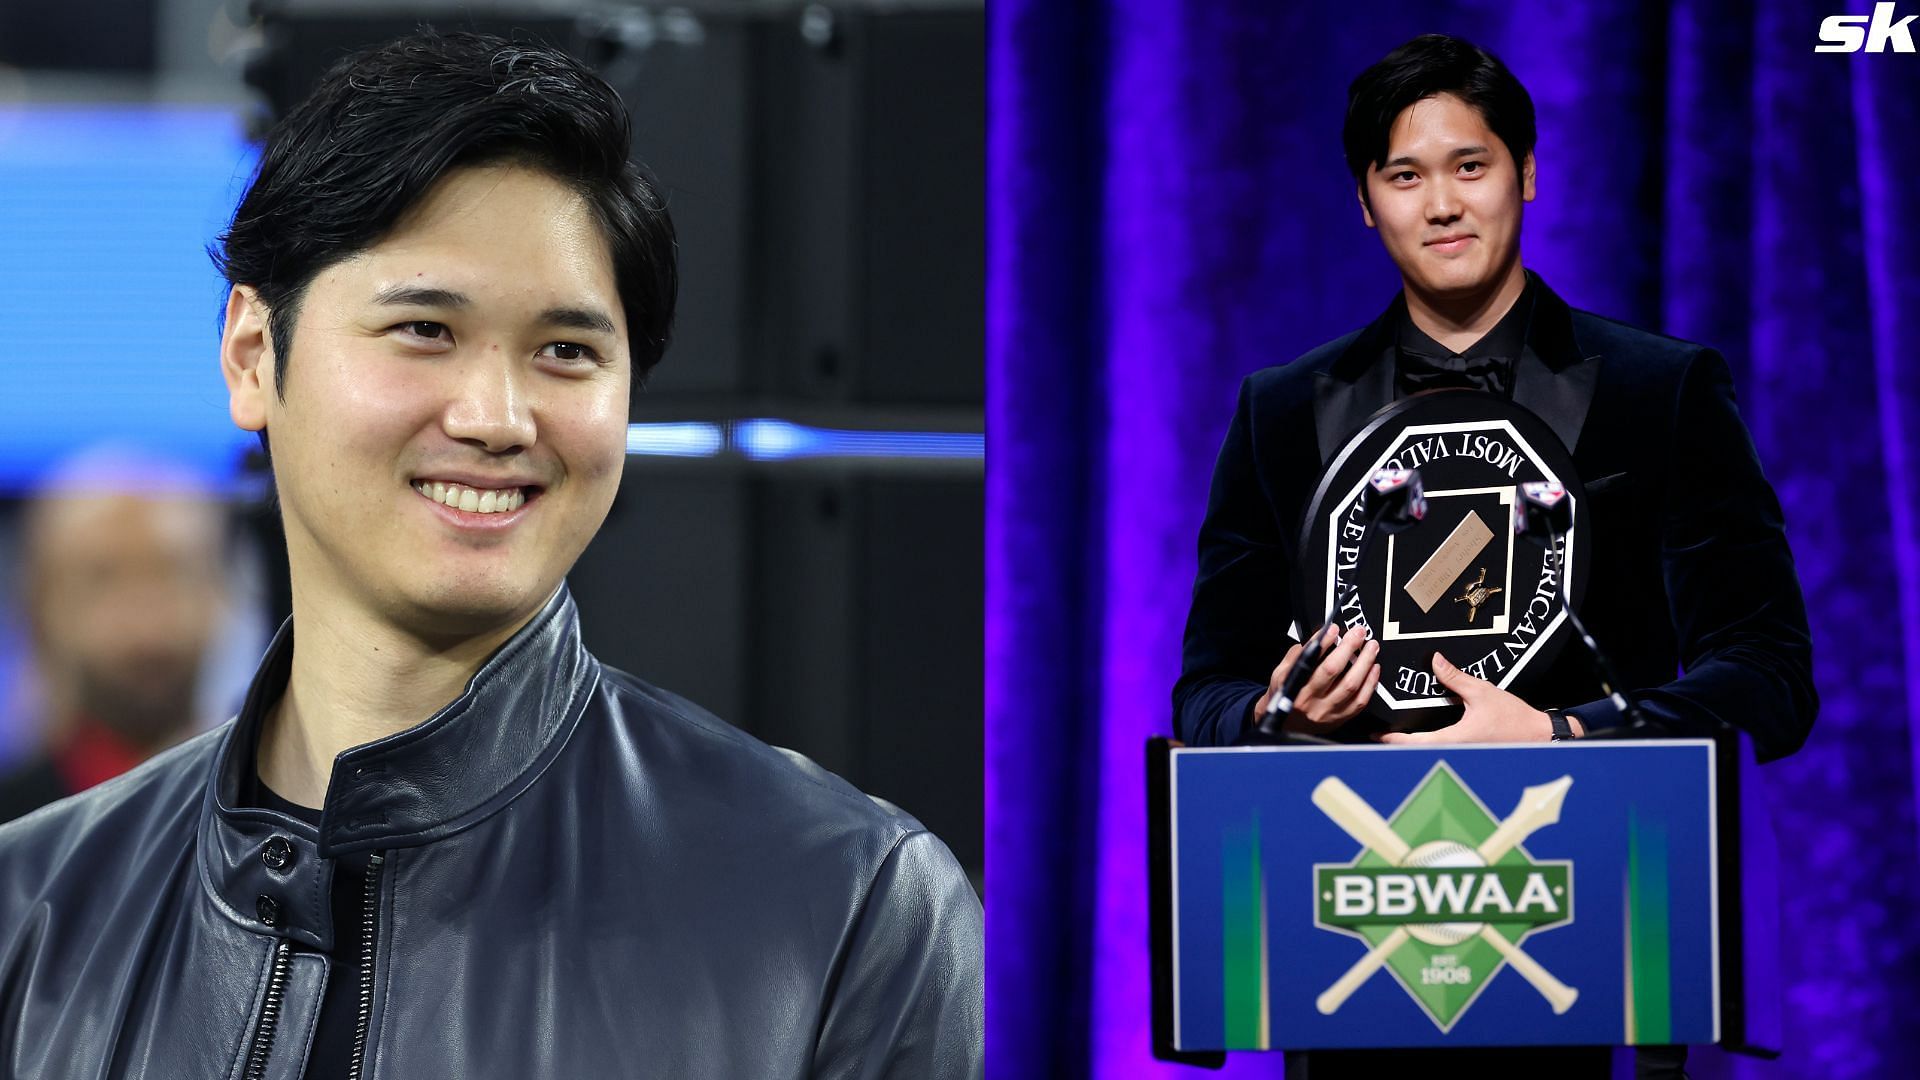 MLB player Shohei Ohtani of Japan speaks to the crowd after receiving the American League Most Valuable Player award during the 2024 BBWAA Awards Dinner at New York